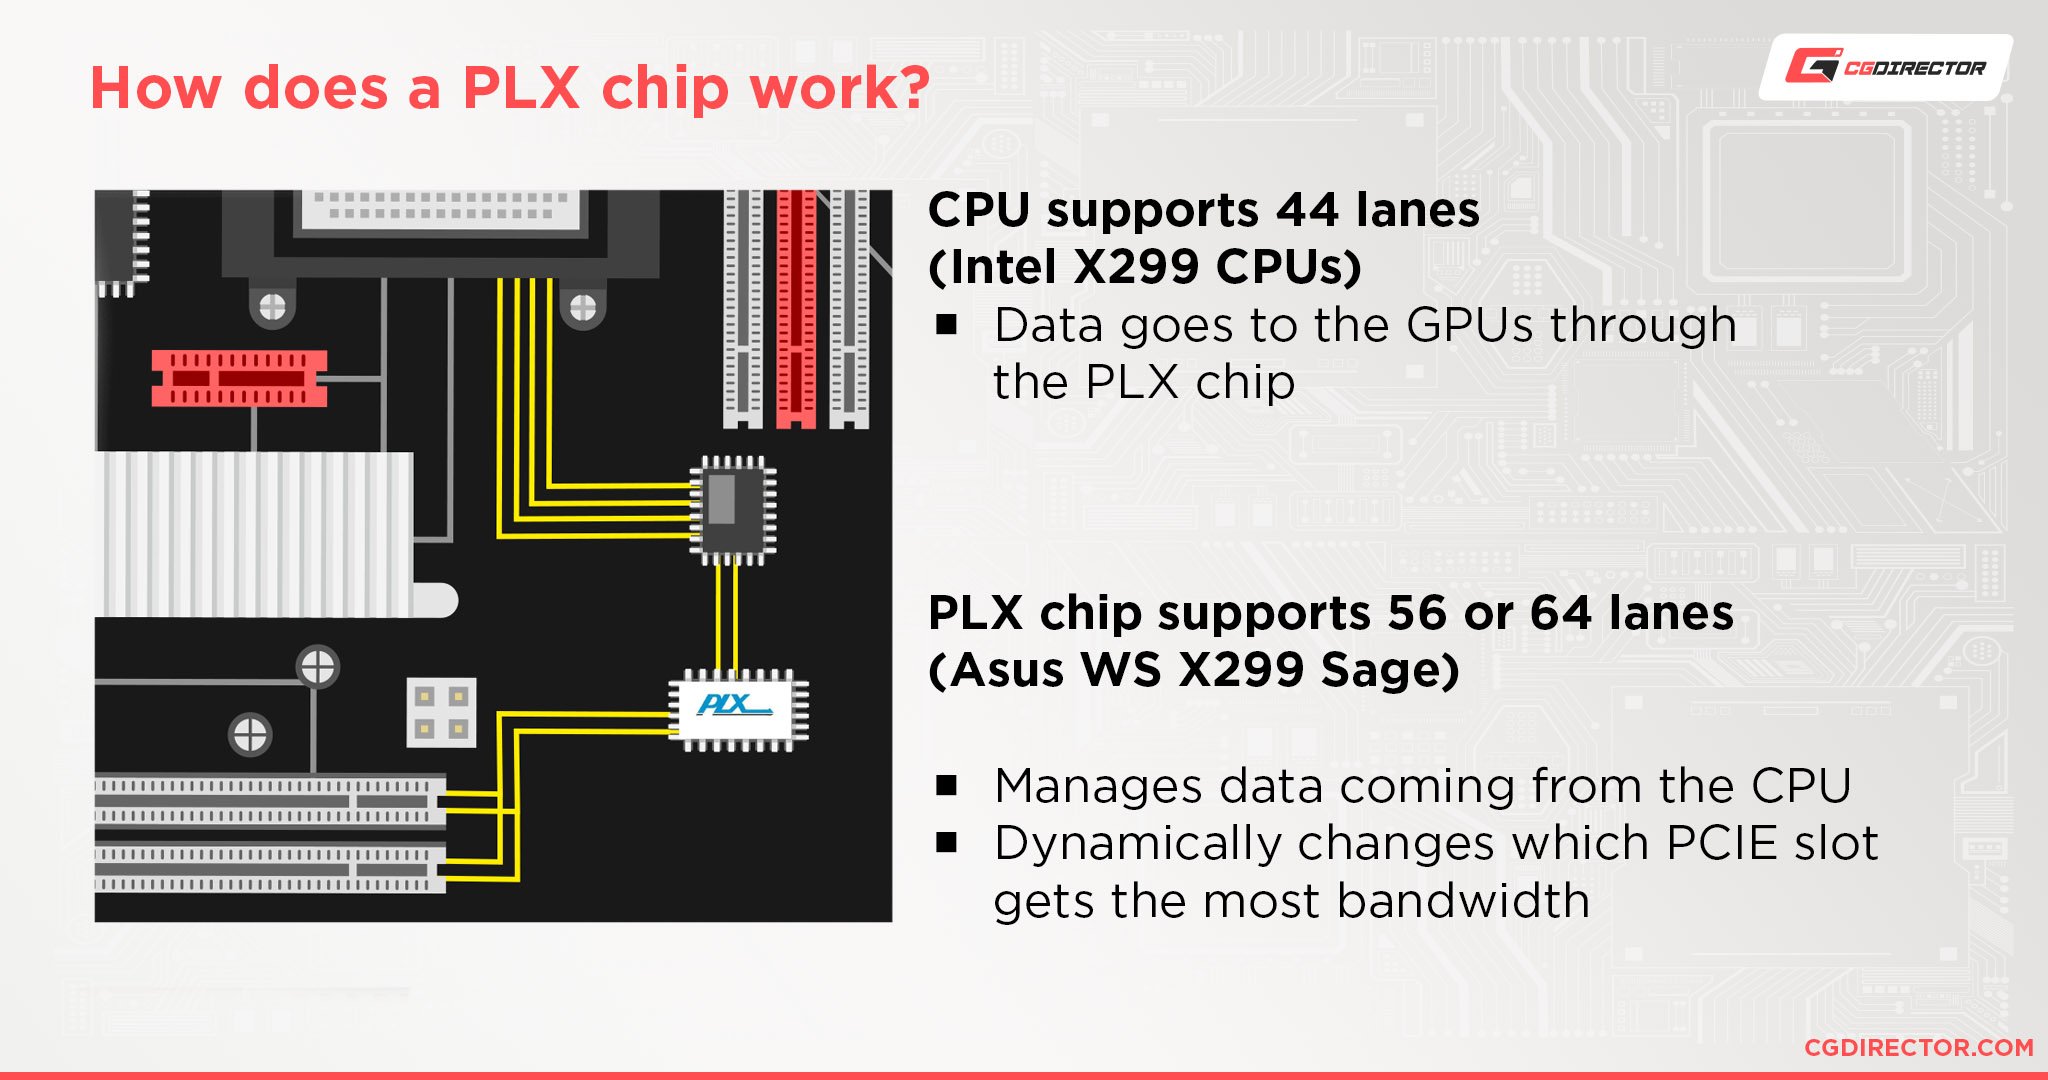 How does a PLX chip work